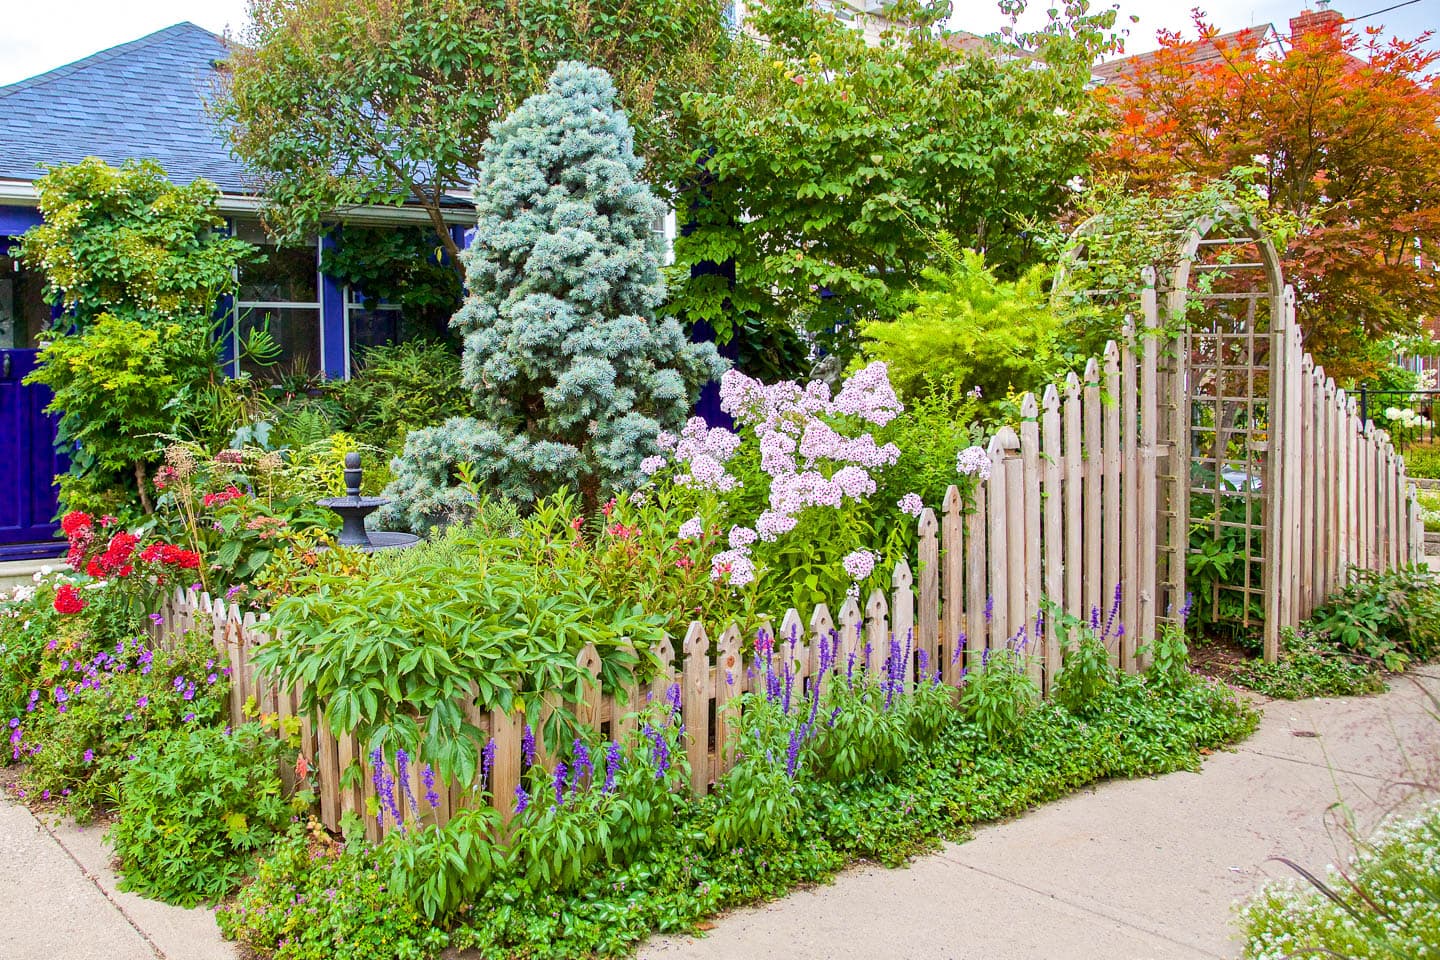 modern cottage garden surrounded by a wood picket fence with an arbor